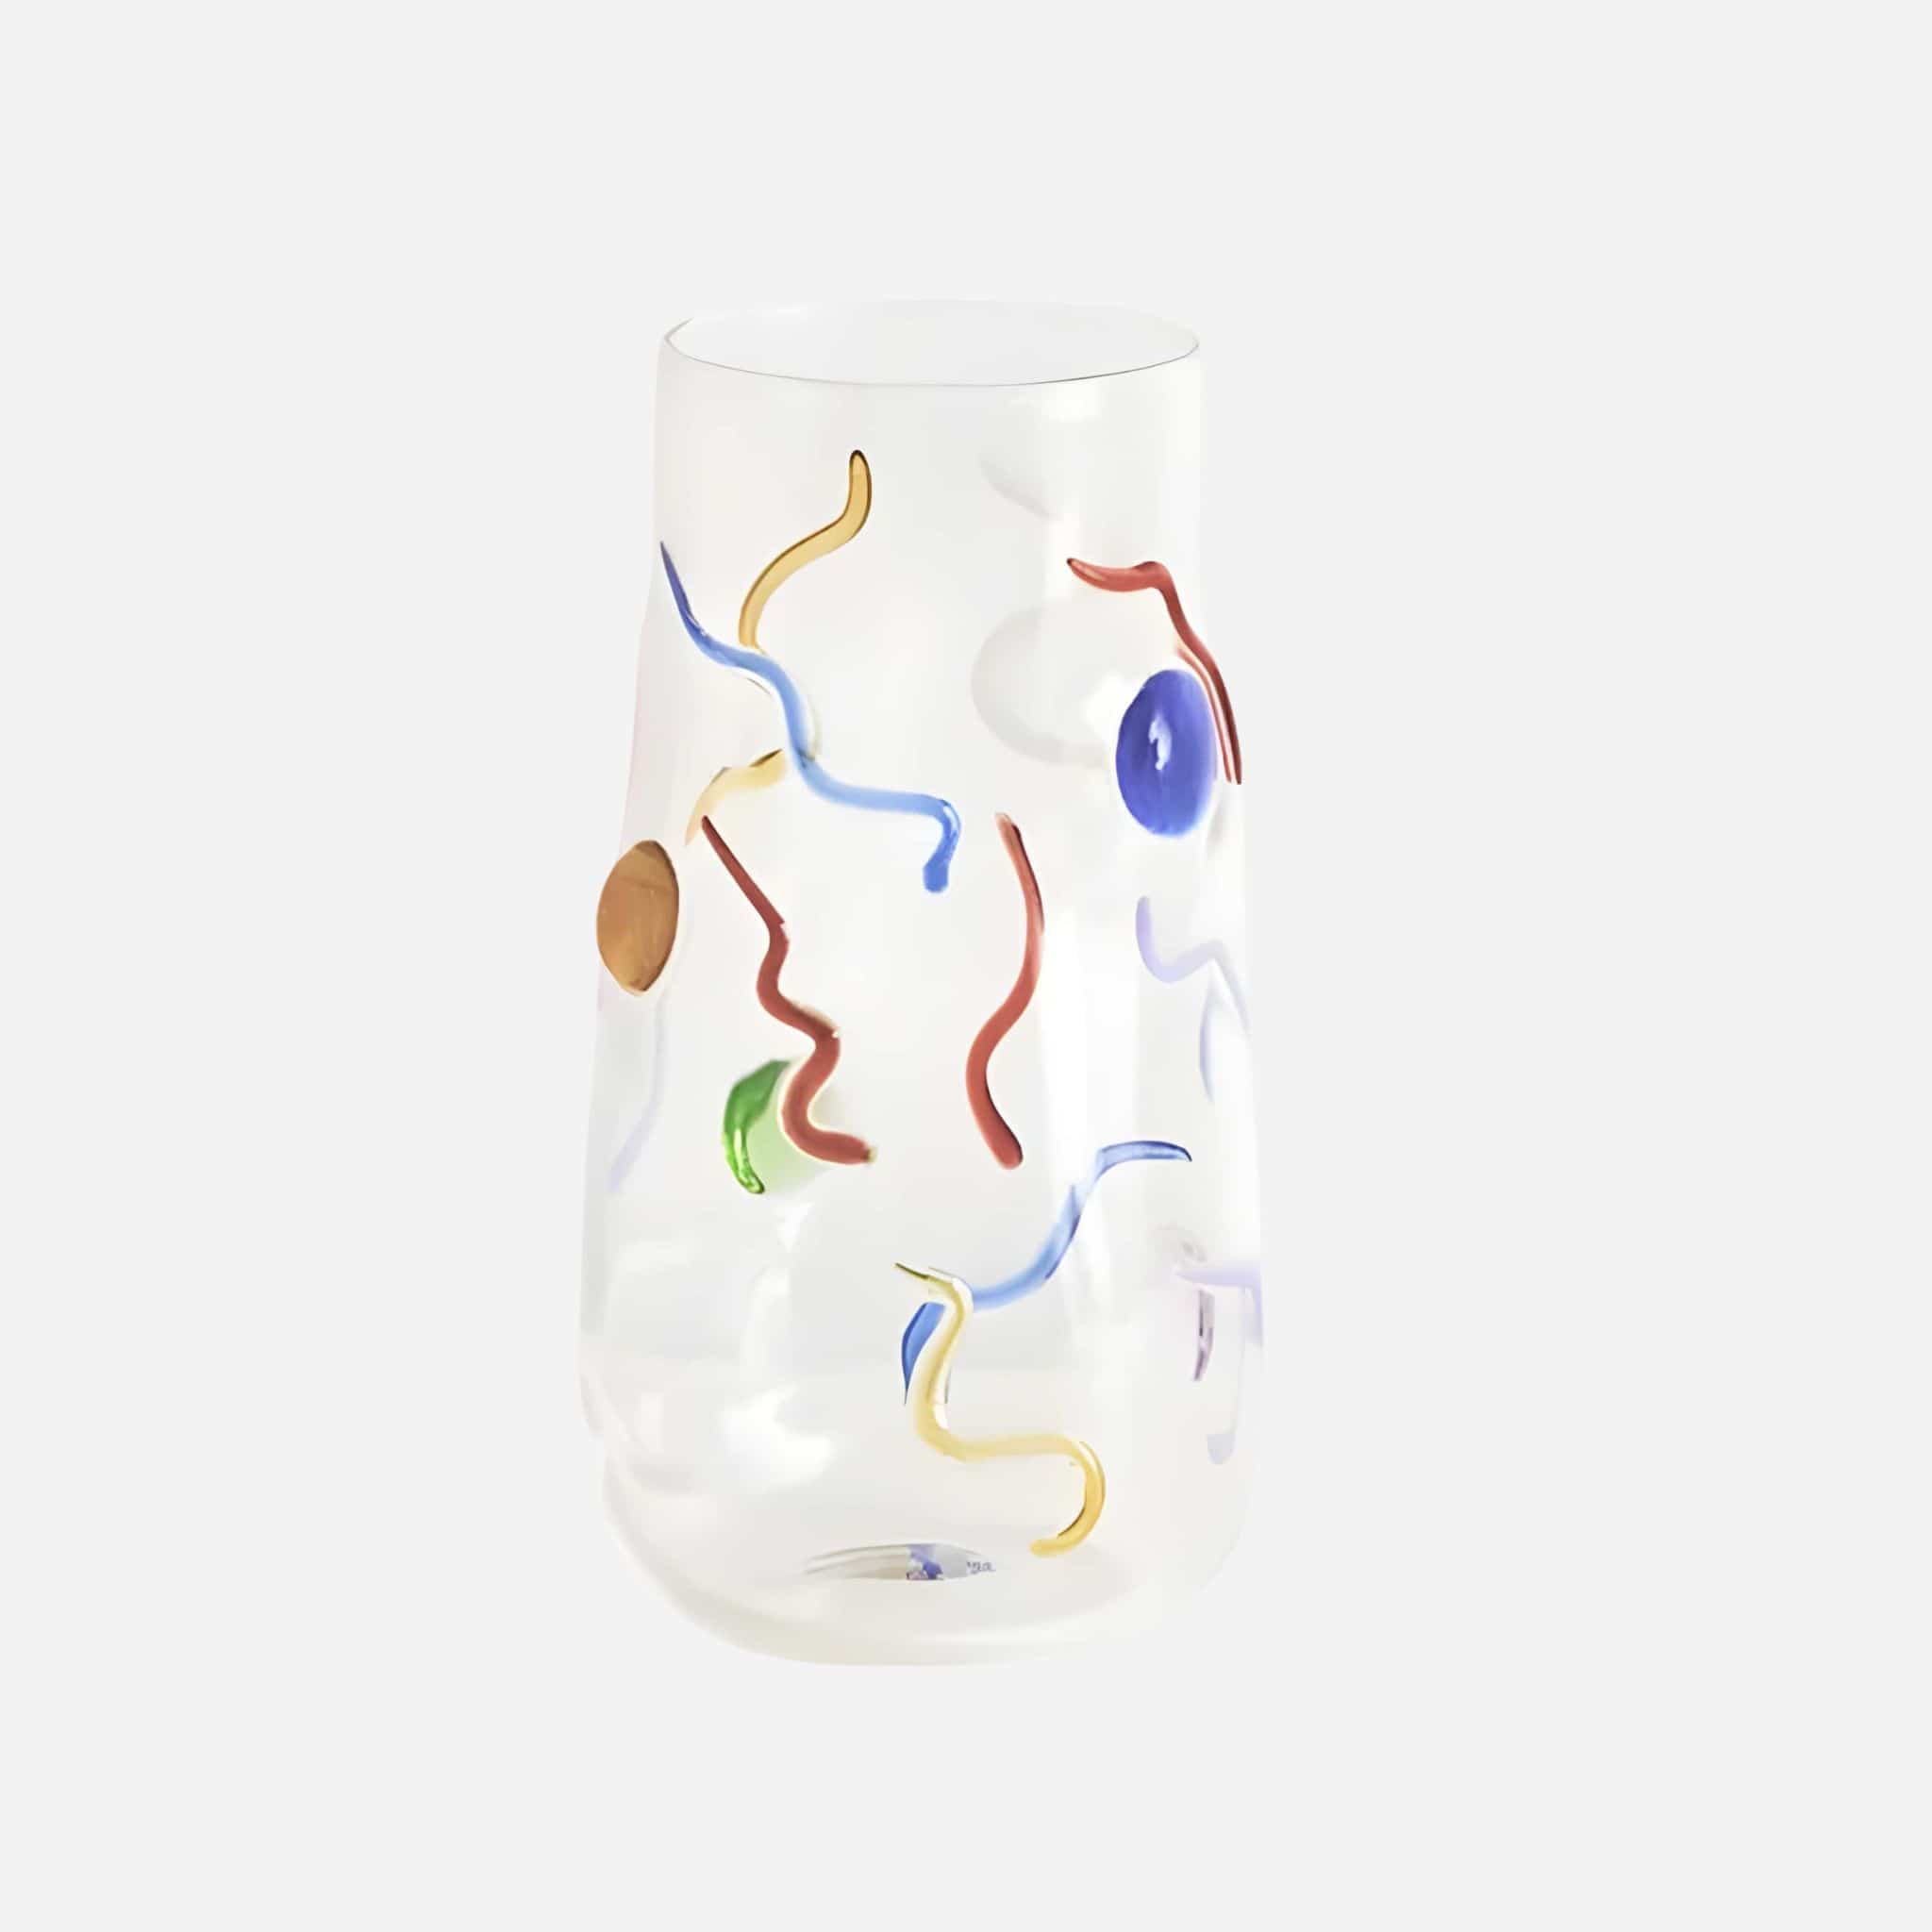 creative glassware party starter highball glass with squiggles